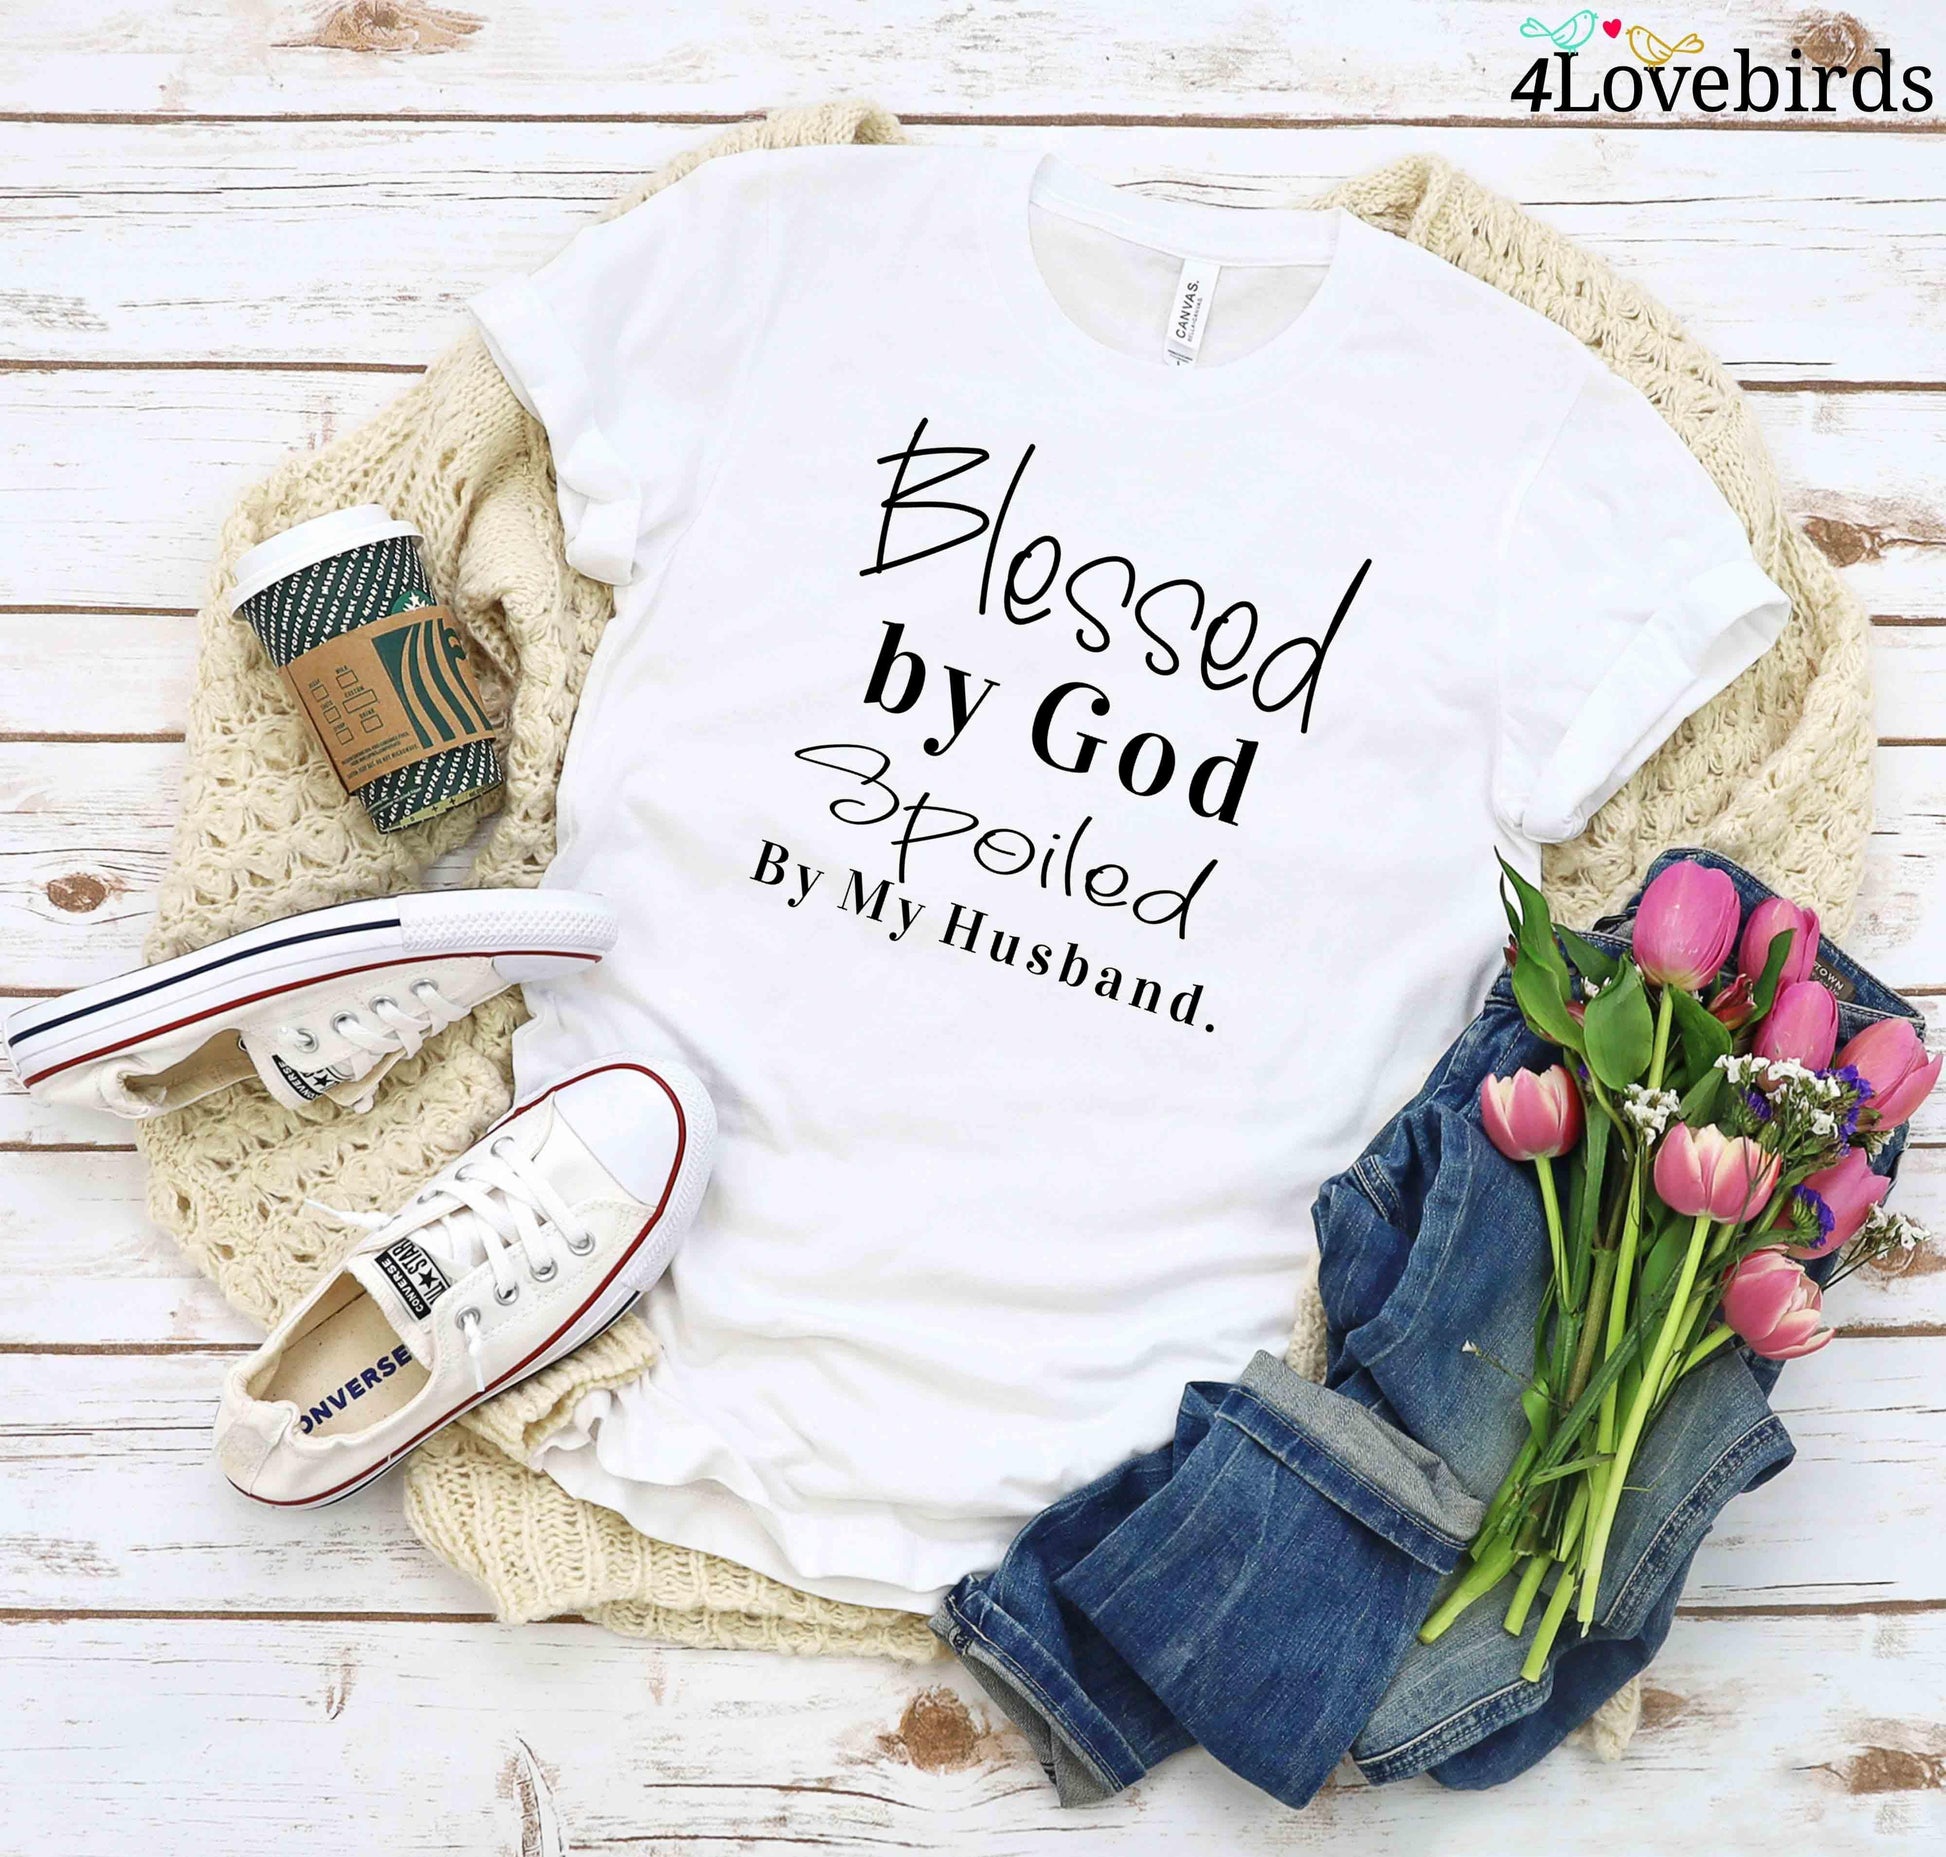 Blessed By God Spoiled By My Husband T-Shirts, Gift For Wife, Valentine's Day Hoodies, Couples Matching Sweatshirts - 4Lovebirds